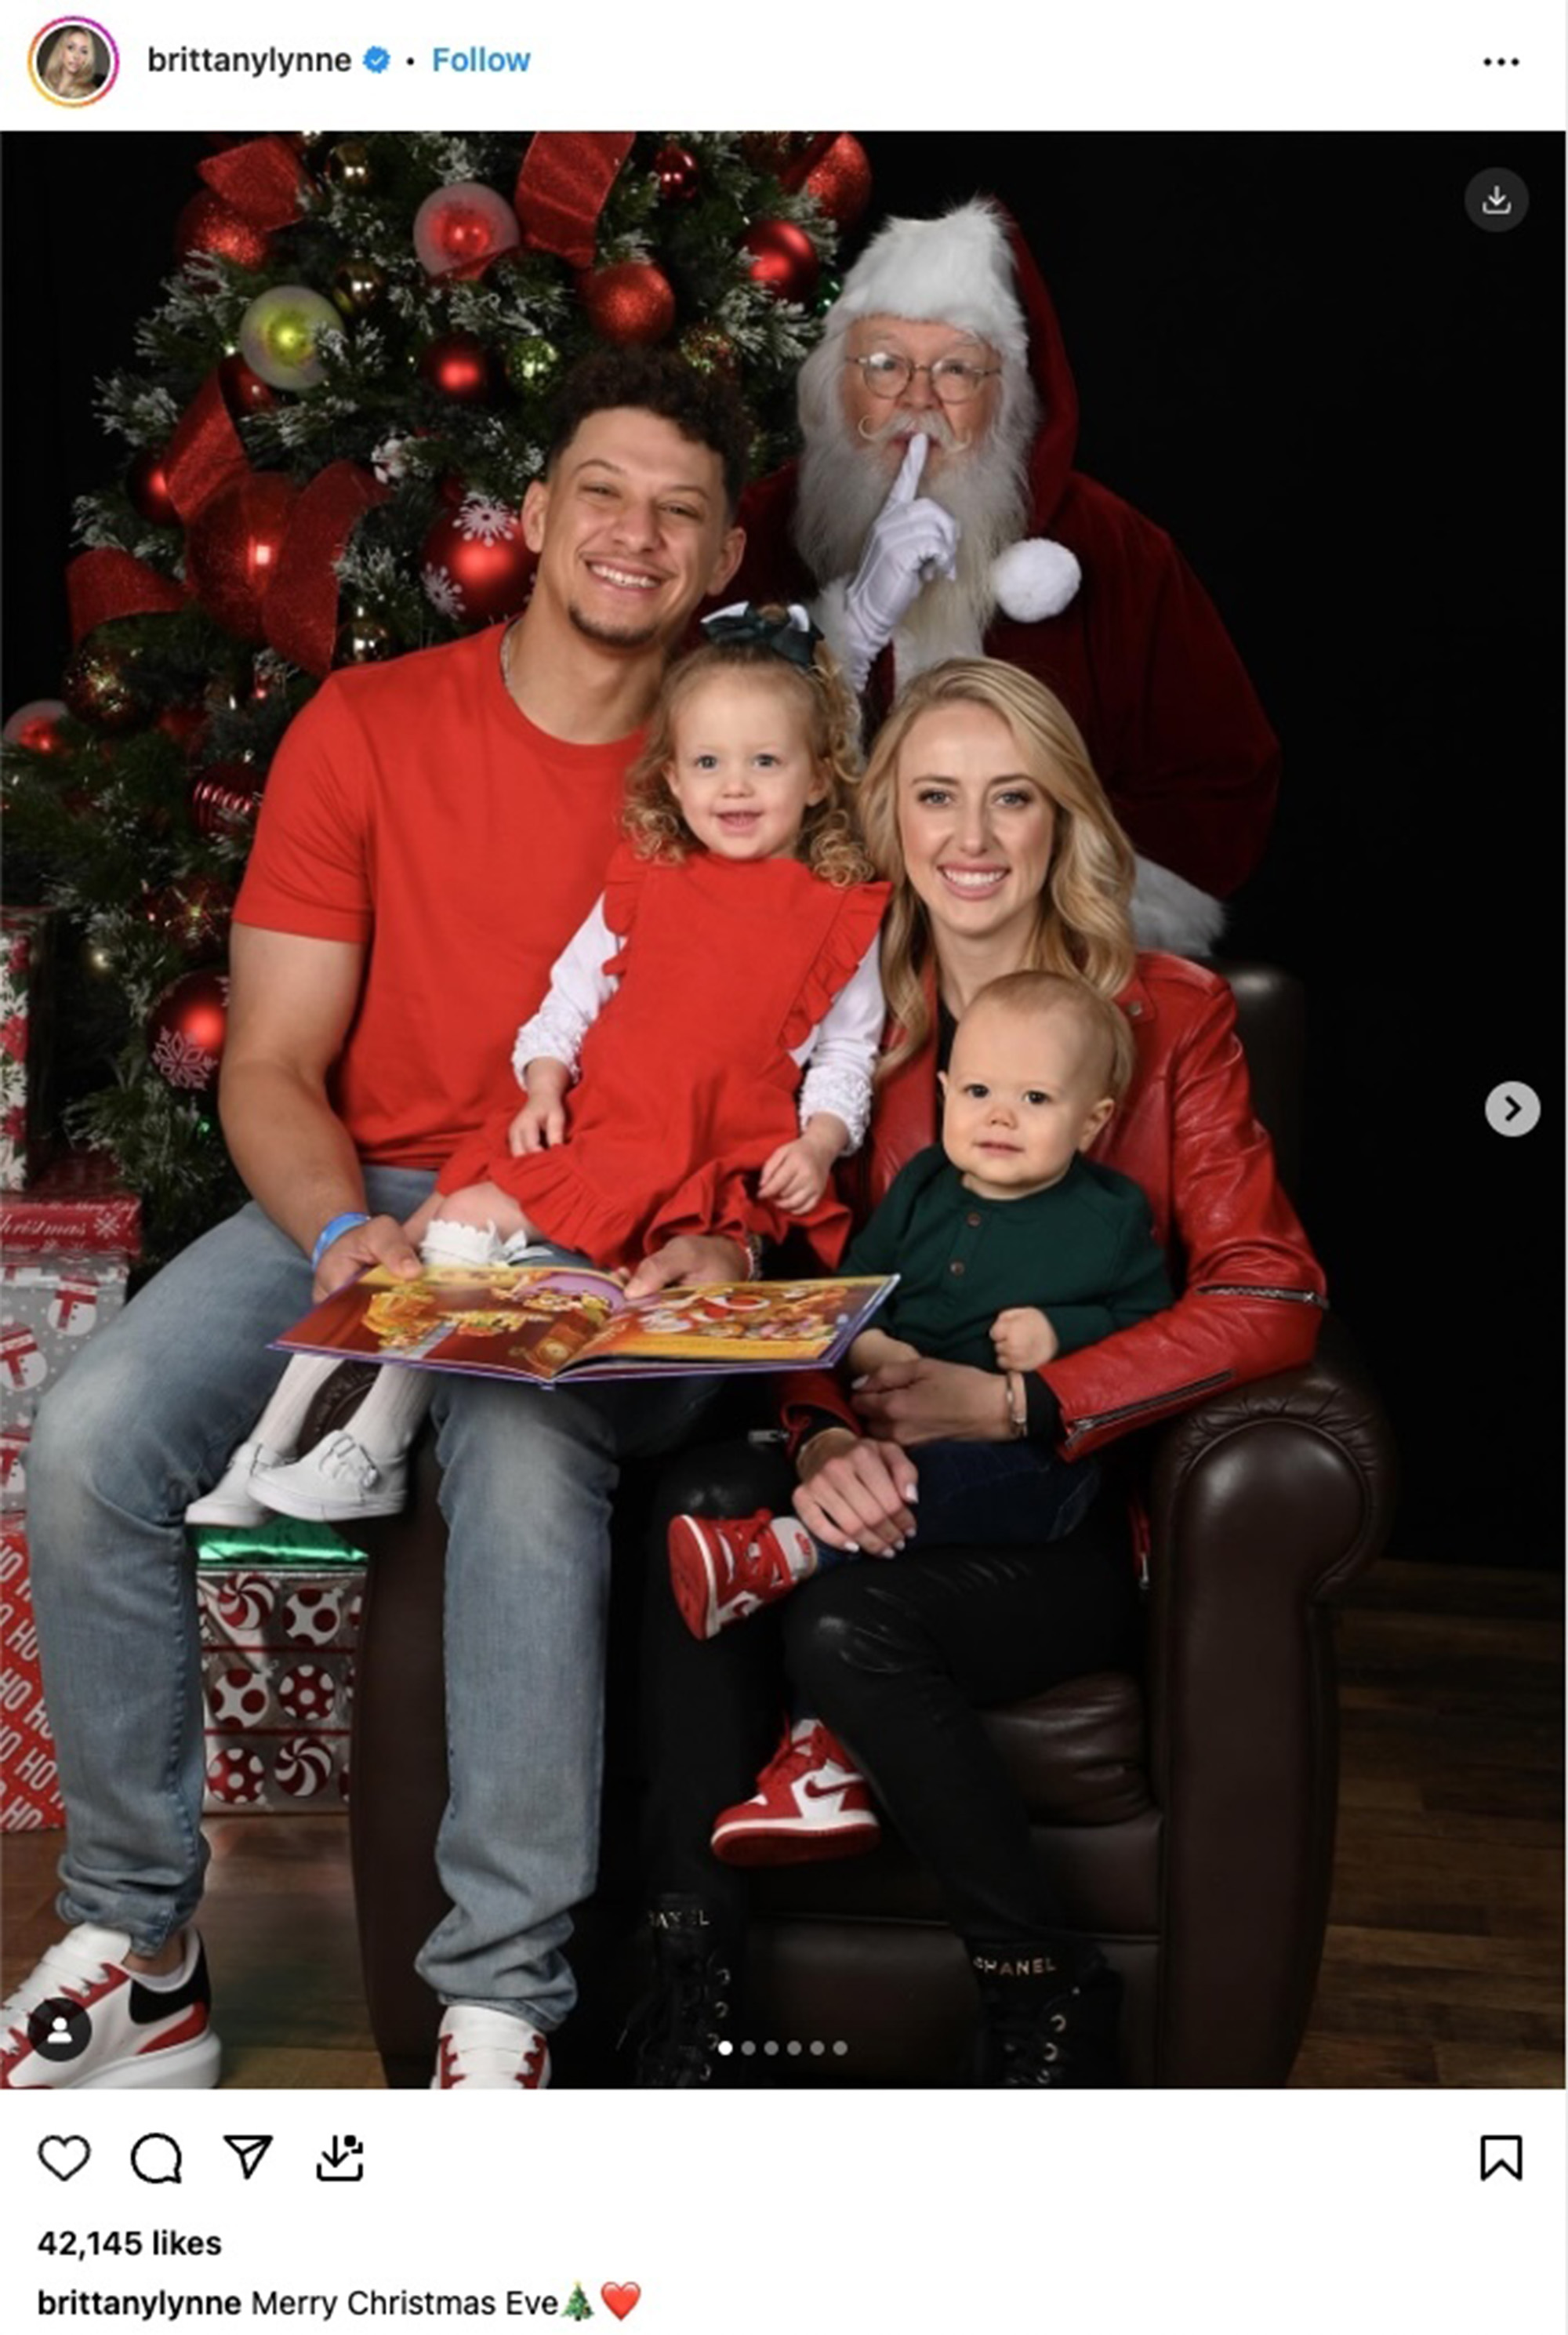 Brittany Mahomes, the wife of Chiefs QB Patrick Mahomes, posted new holiday photos on Instagram.